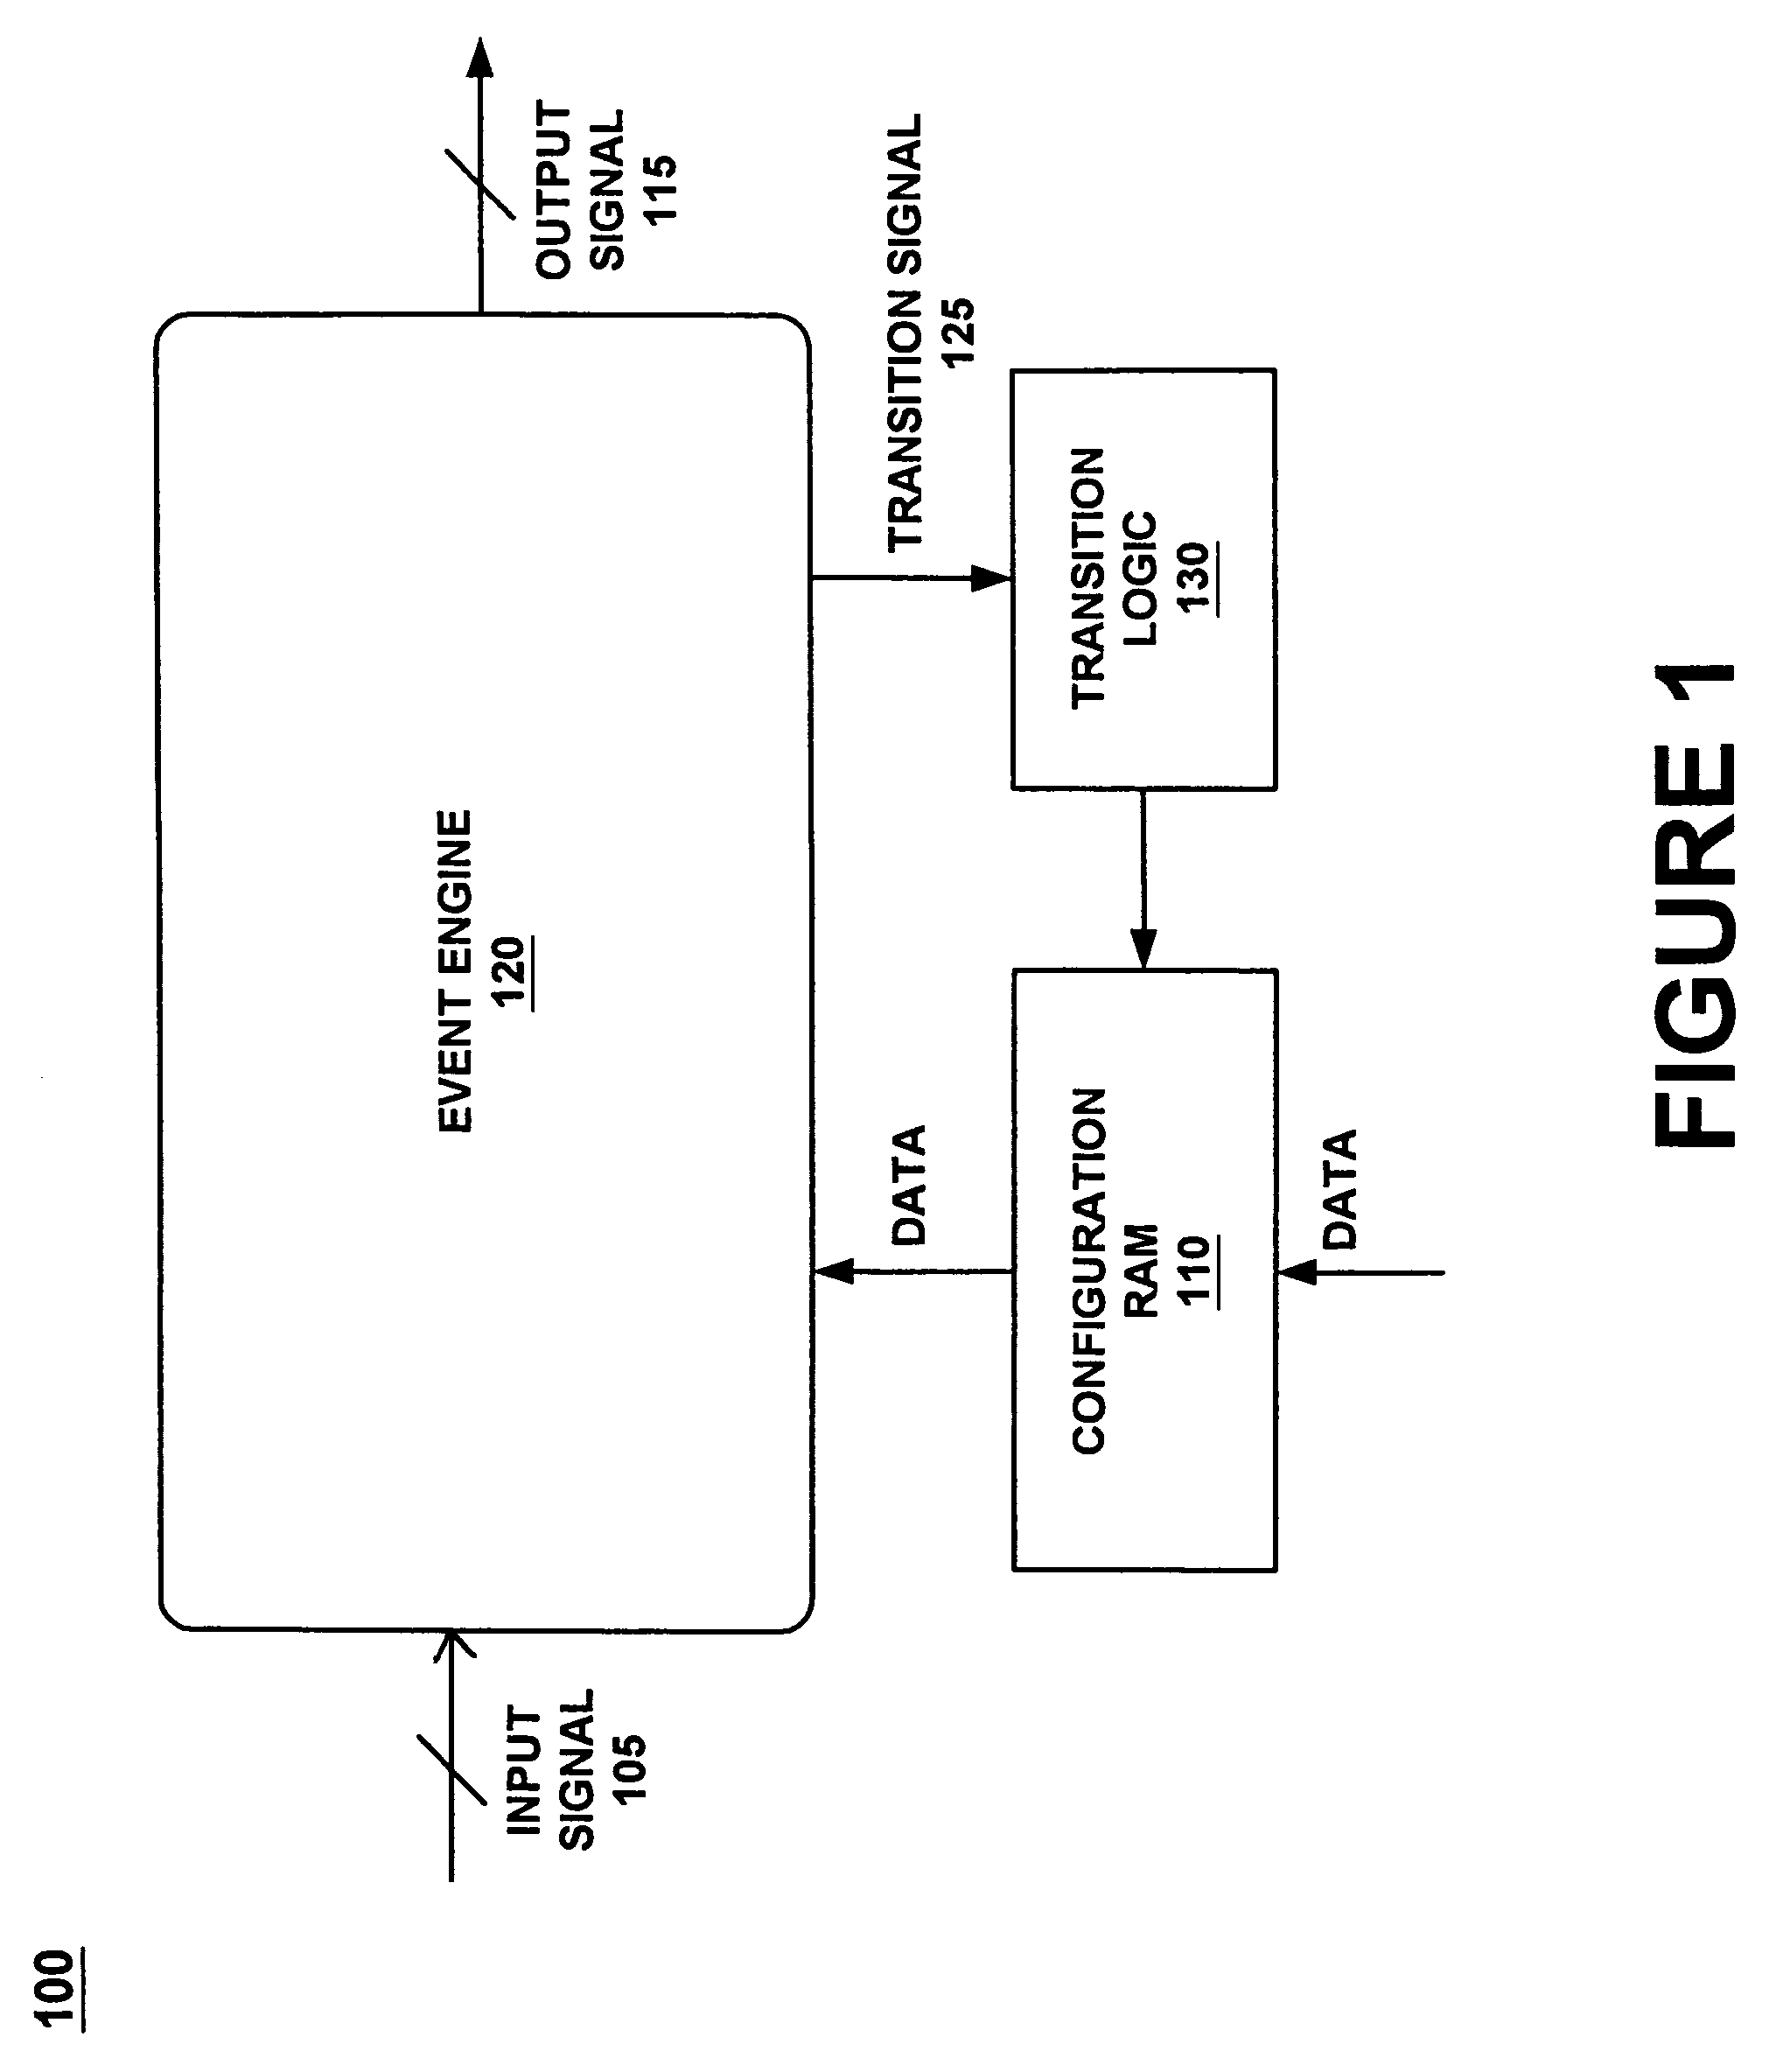 Event architecture and method for configuring same